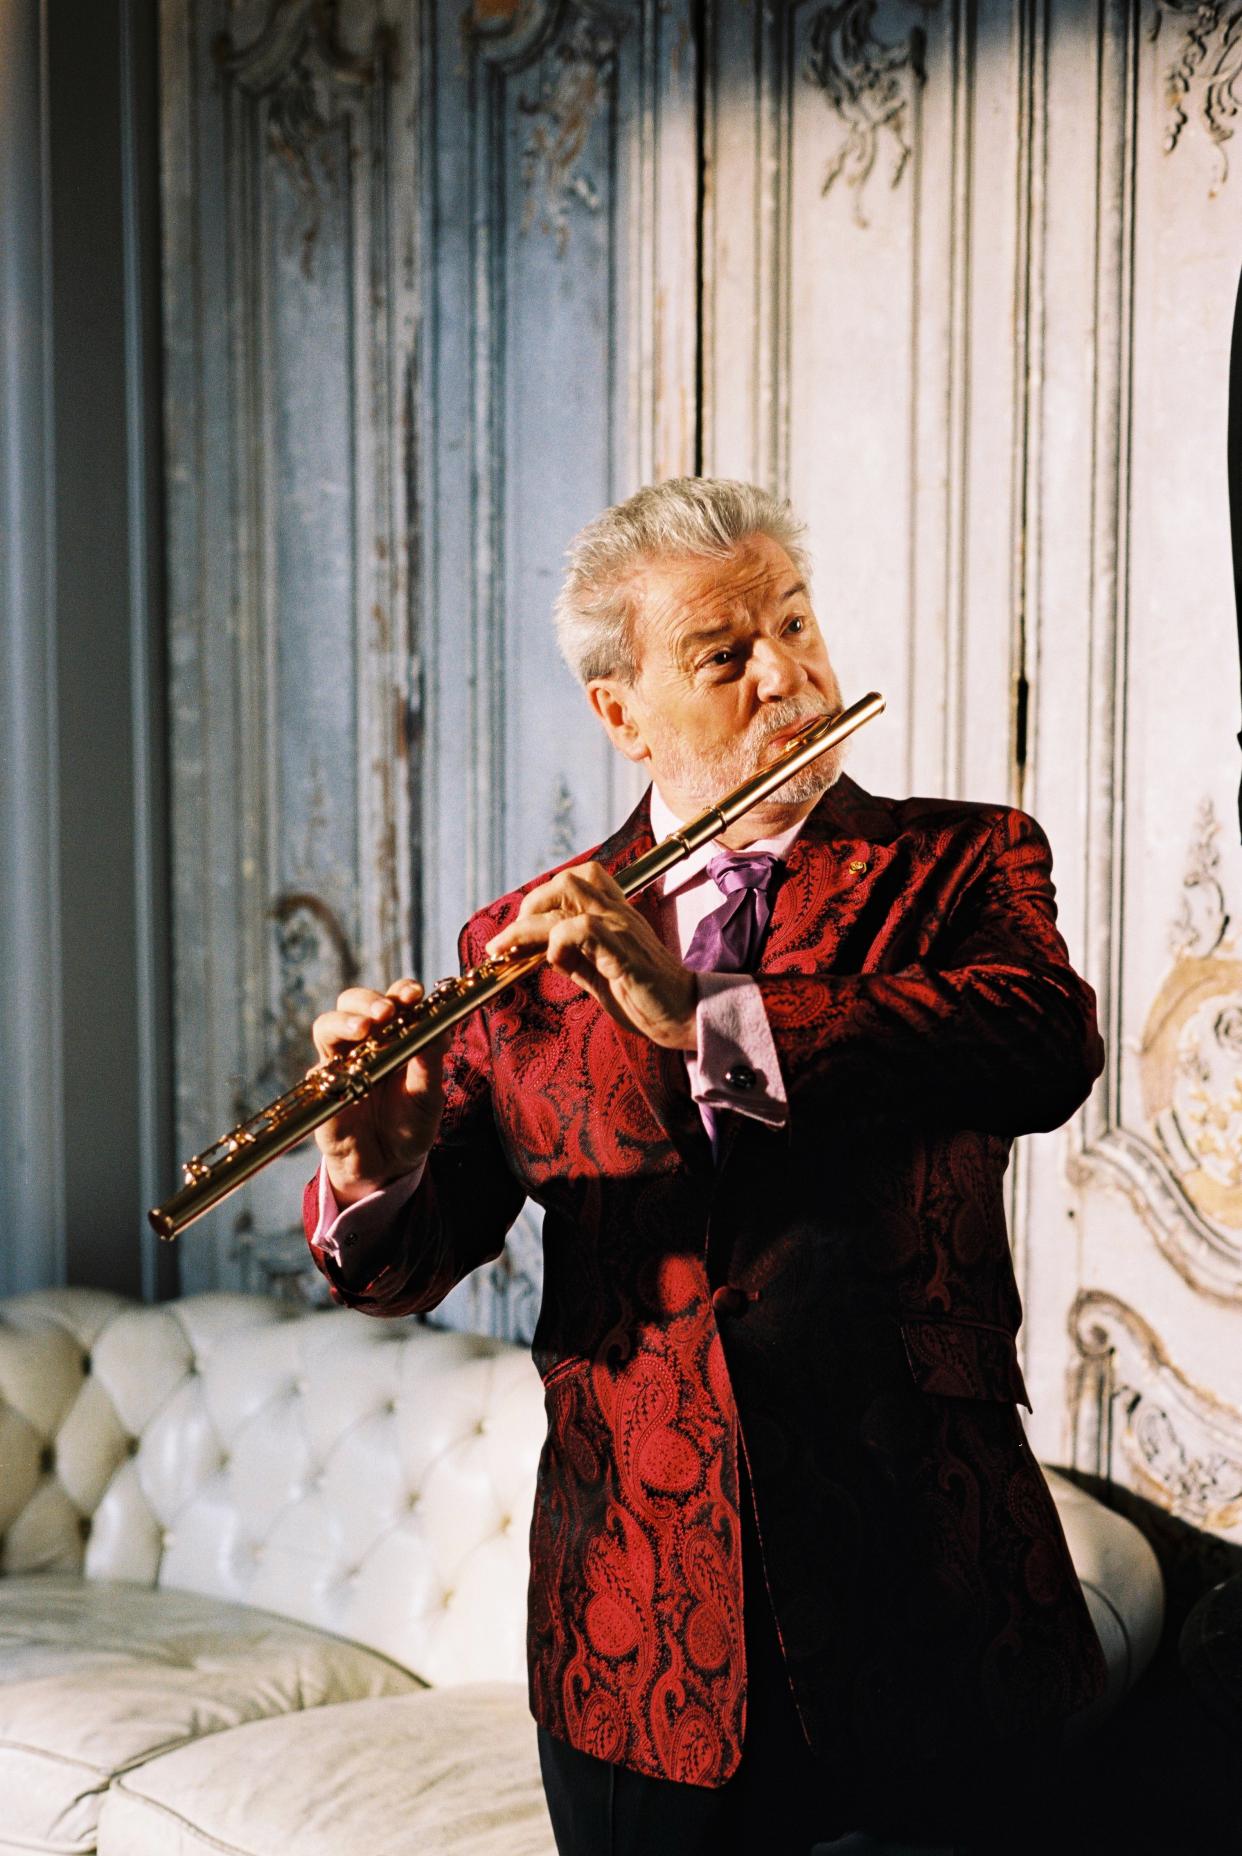 Belfast flautist Sir James Galway, who performed with Lizzo at the 2023 Met Gala (Impact Communications/PA)